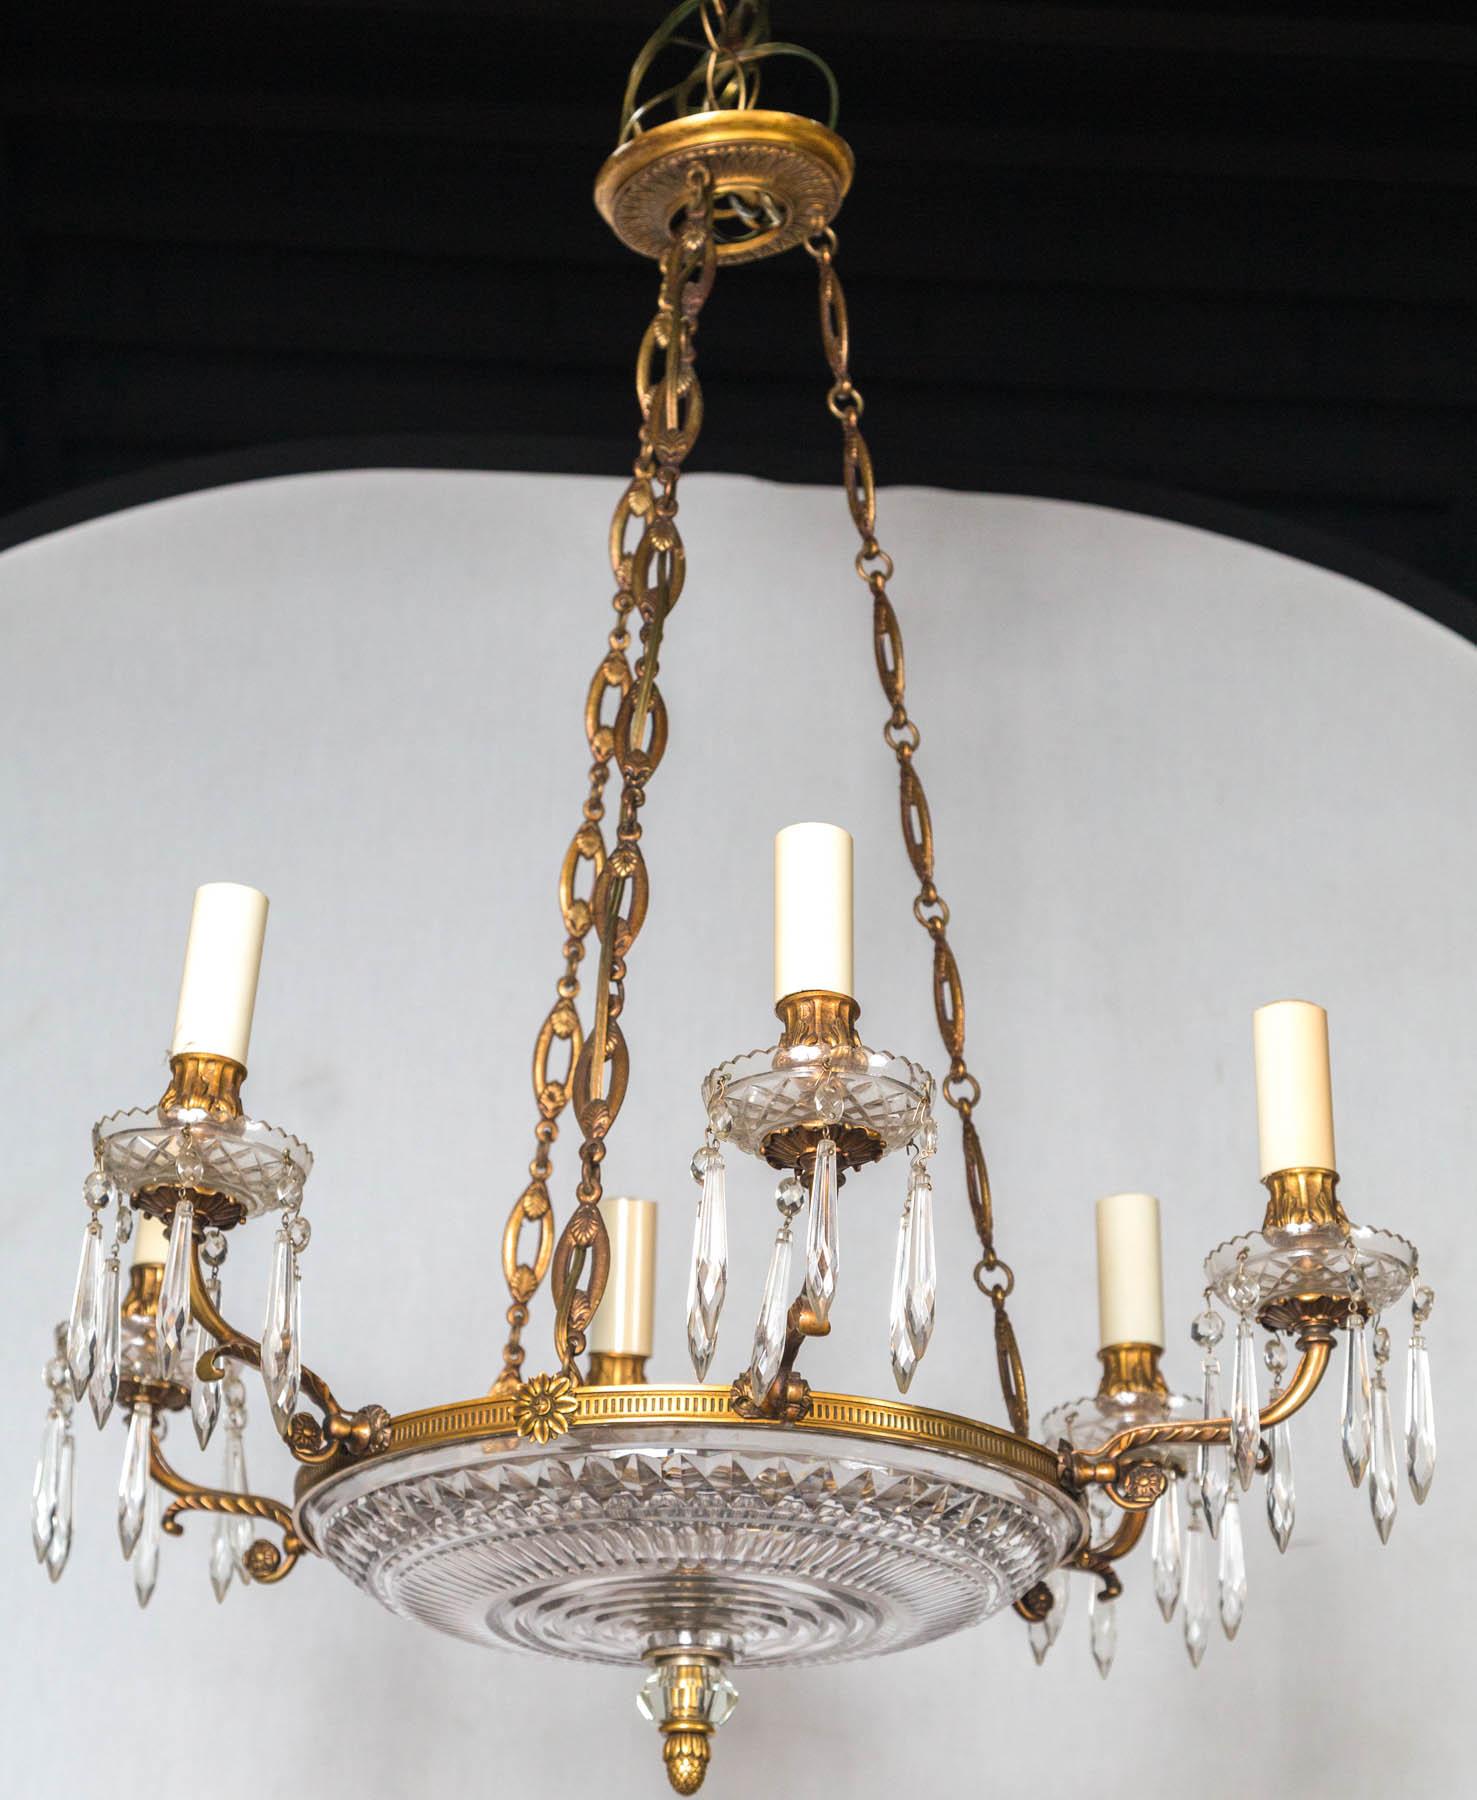 A circa 1900 fine diamond cut crystal and doré bronze Baccarat chandelier. Classical form with crisp sharp French crystal interior with rich doré bronze ormolu mounts. Measuring 33